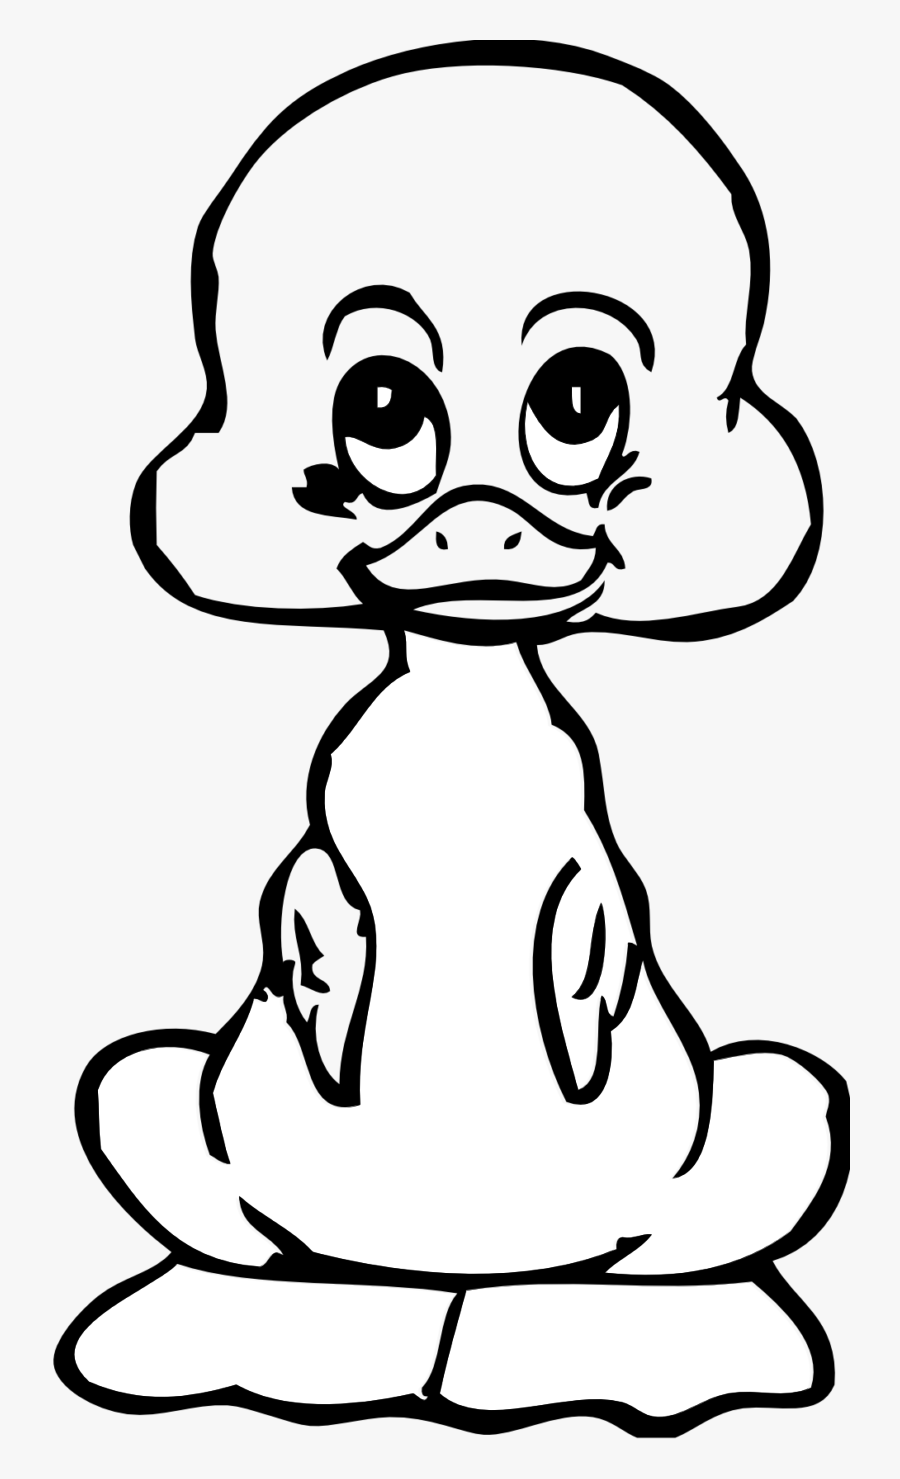 Duck Hunting Clipart Black And White - Ugly Duckling Clipart Black And White, Transparent Clipart